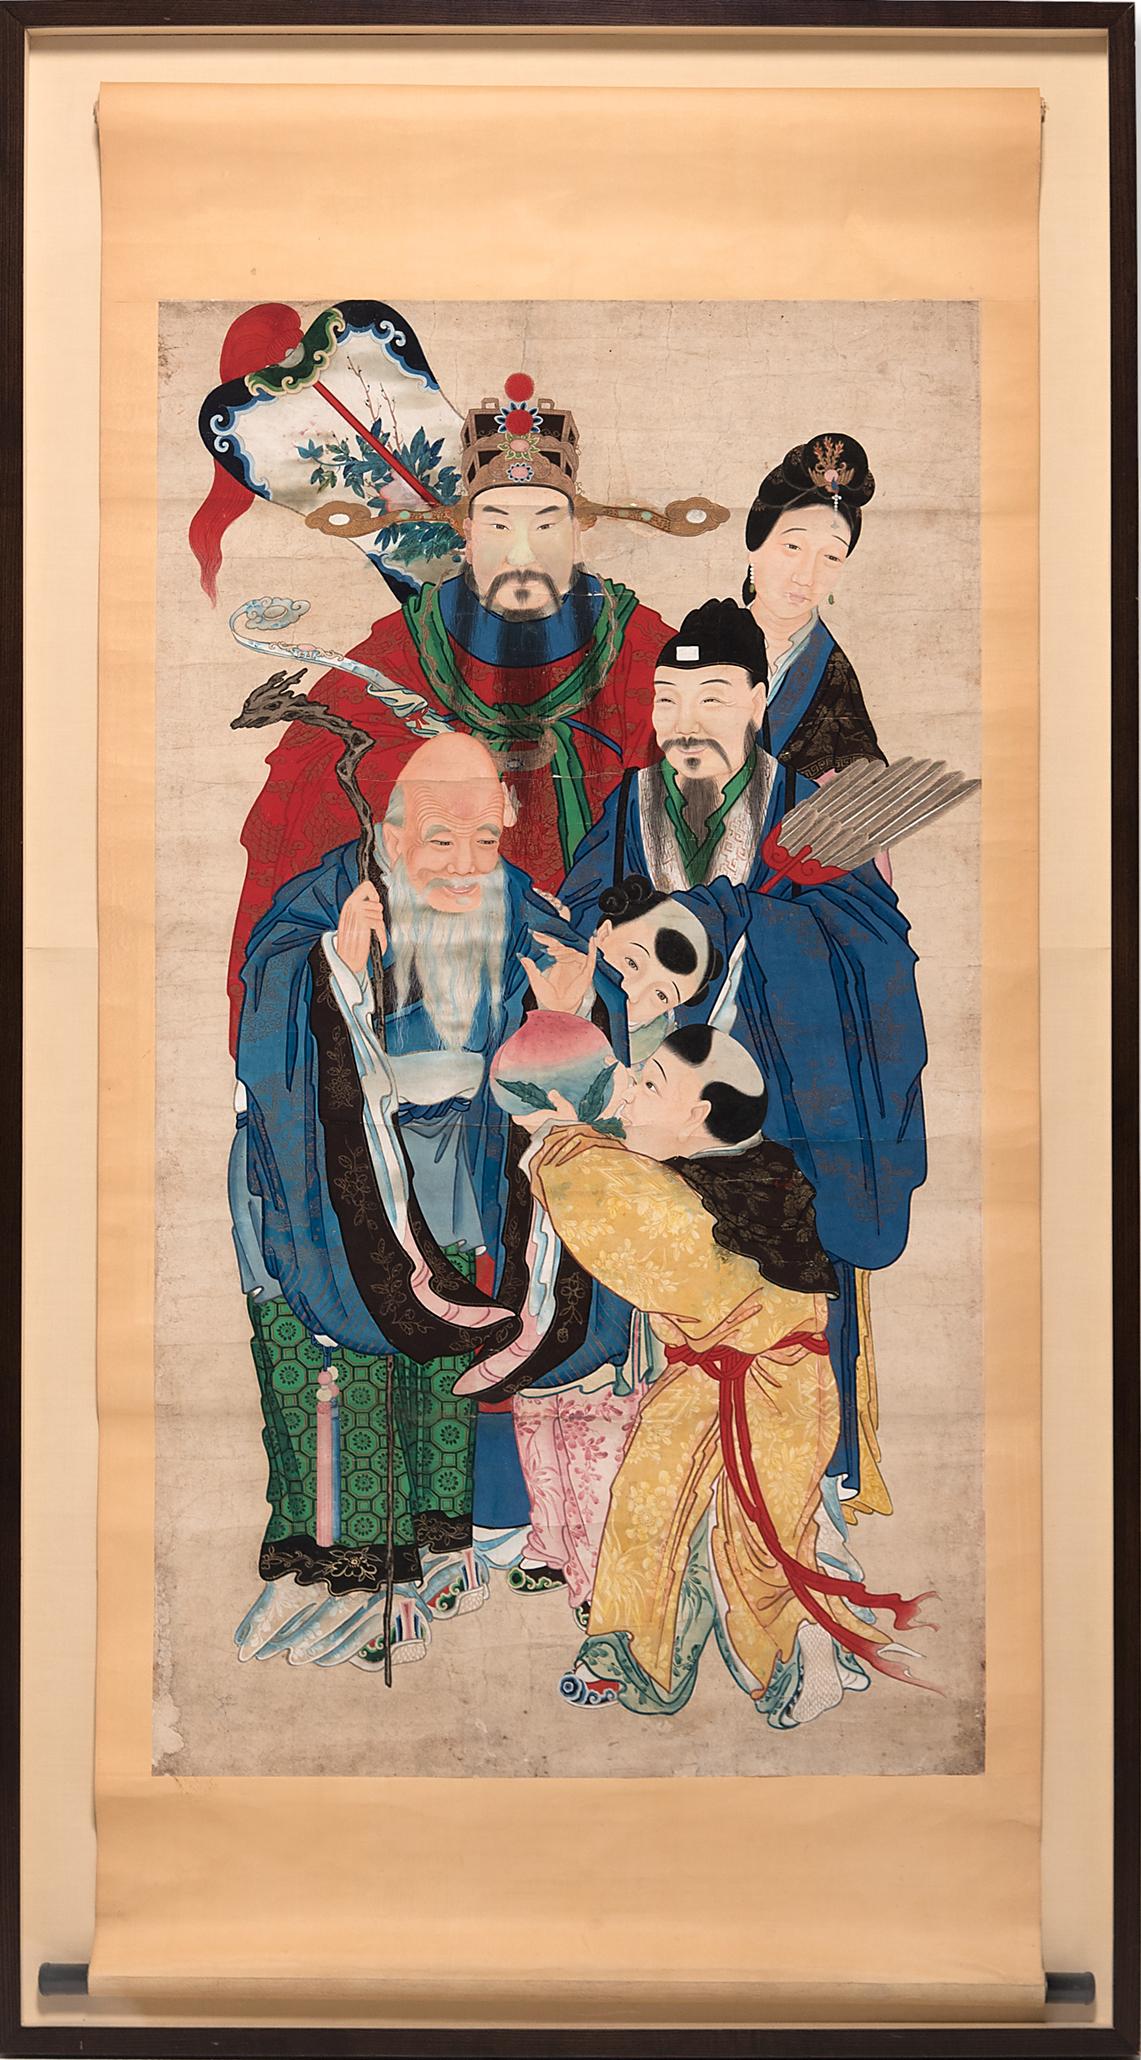 Unknown Figurative Art - Chinese Lunar New Year Painted Scroll, c. 1850